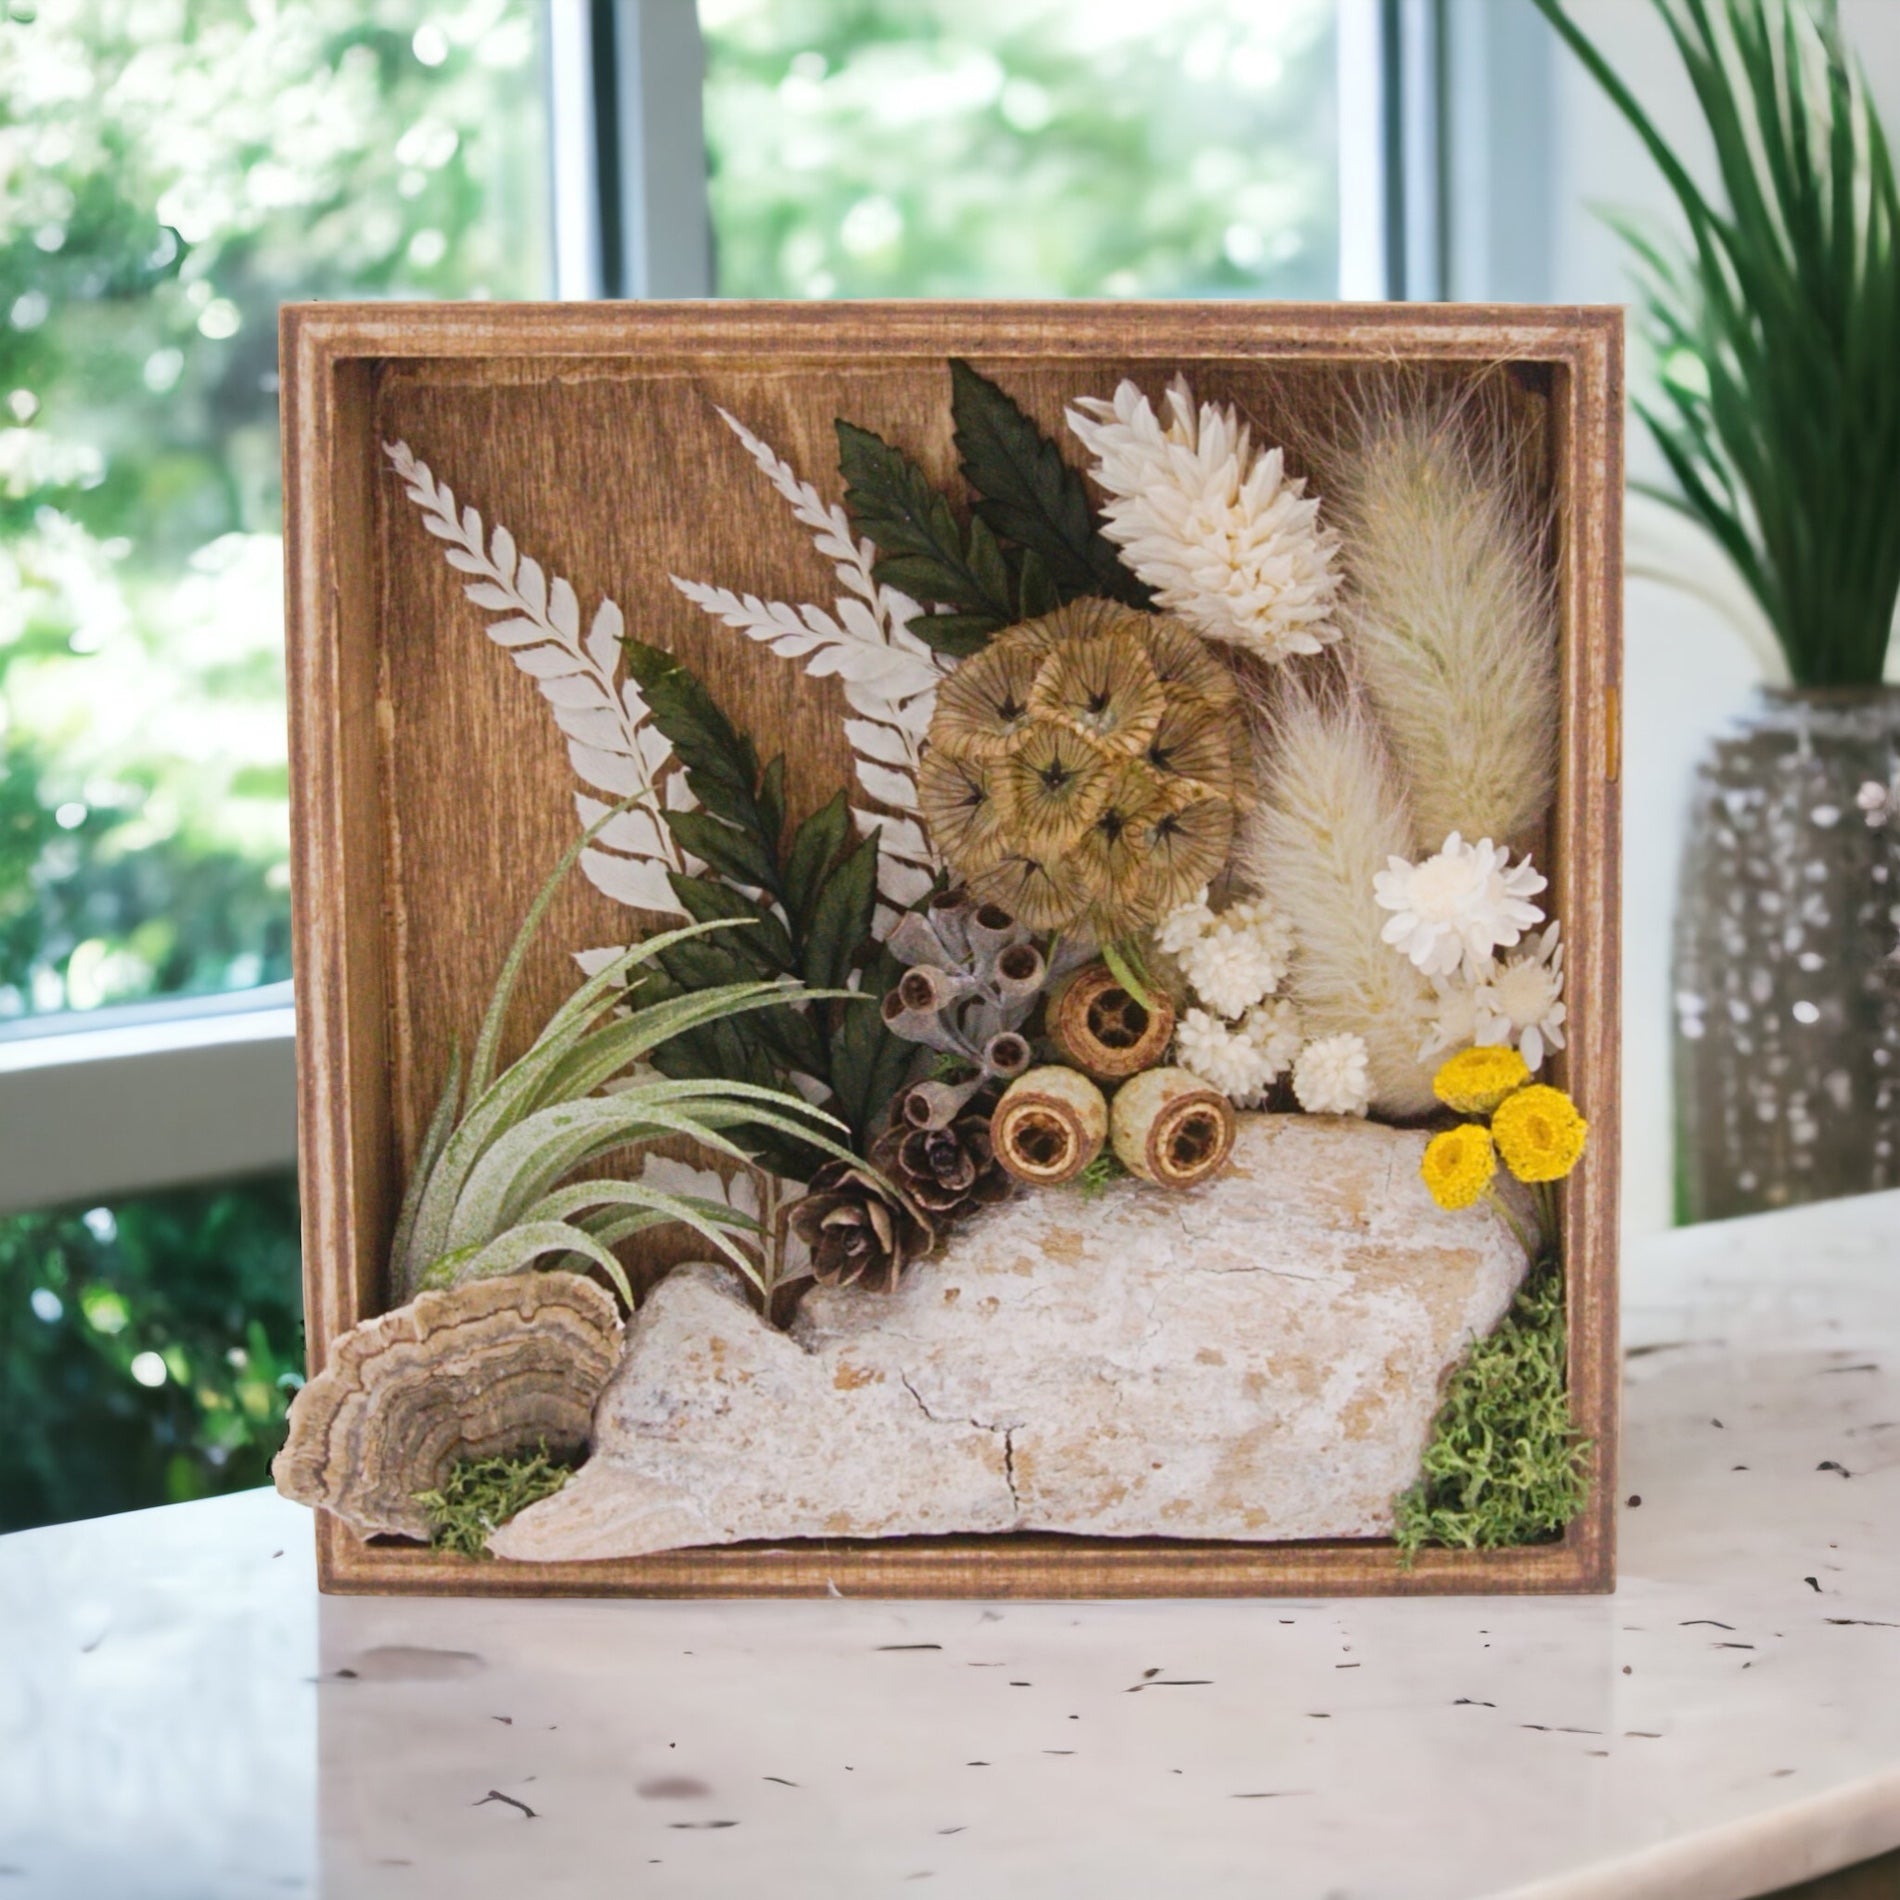 Antique stained wooden box frame filled with dried flowers, wood, moss, dried mushrooms and an airplant